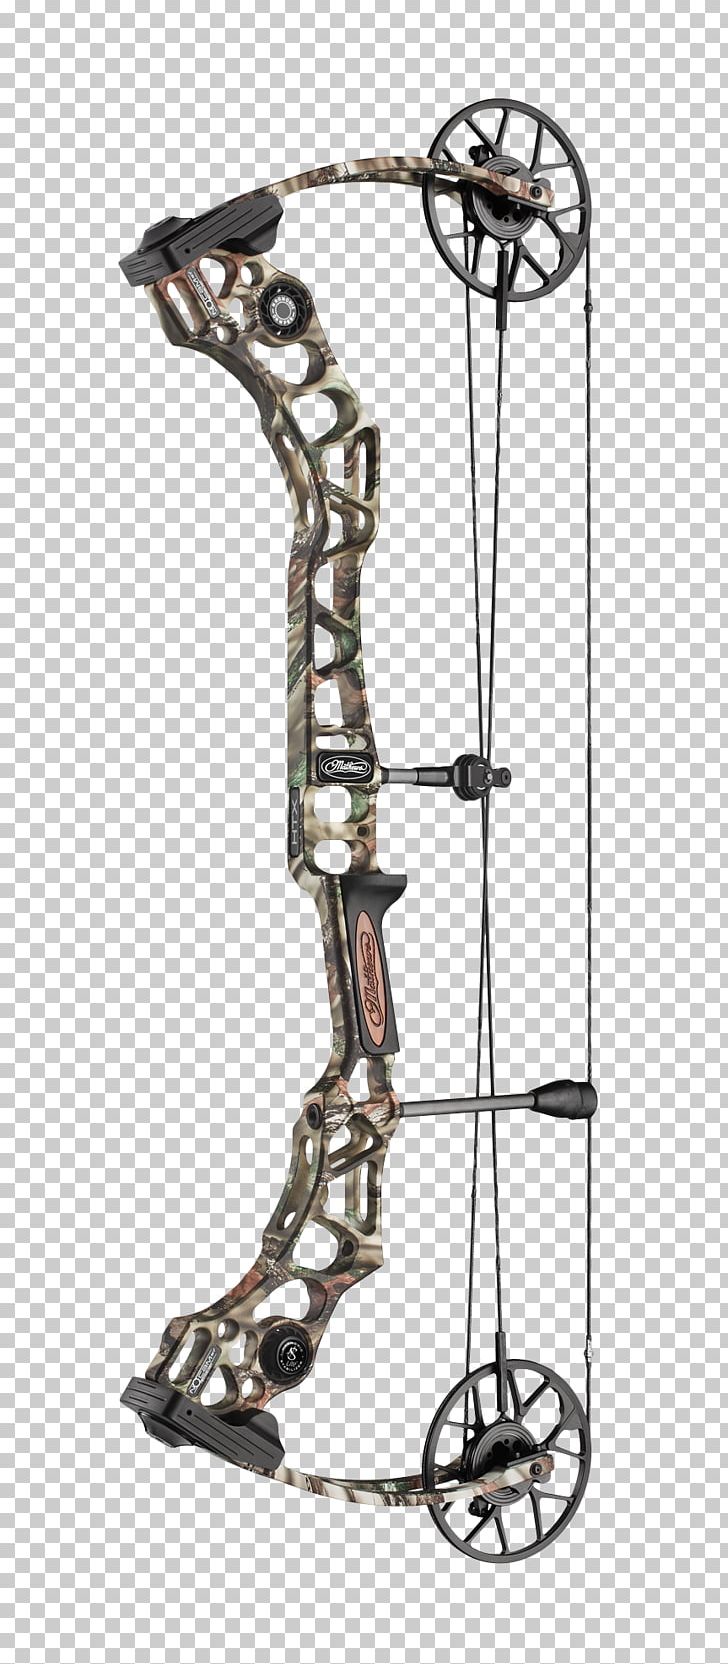 Compound Bows Mathews Archery PNG, Clipart, Archery, Axle, Bit, Bow, Bow And Arrow Free PNG Download